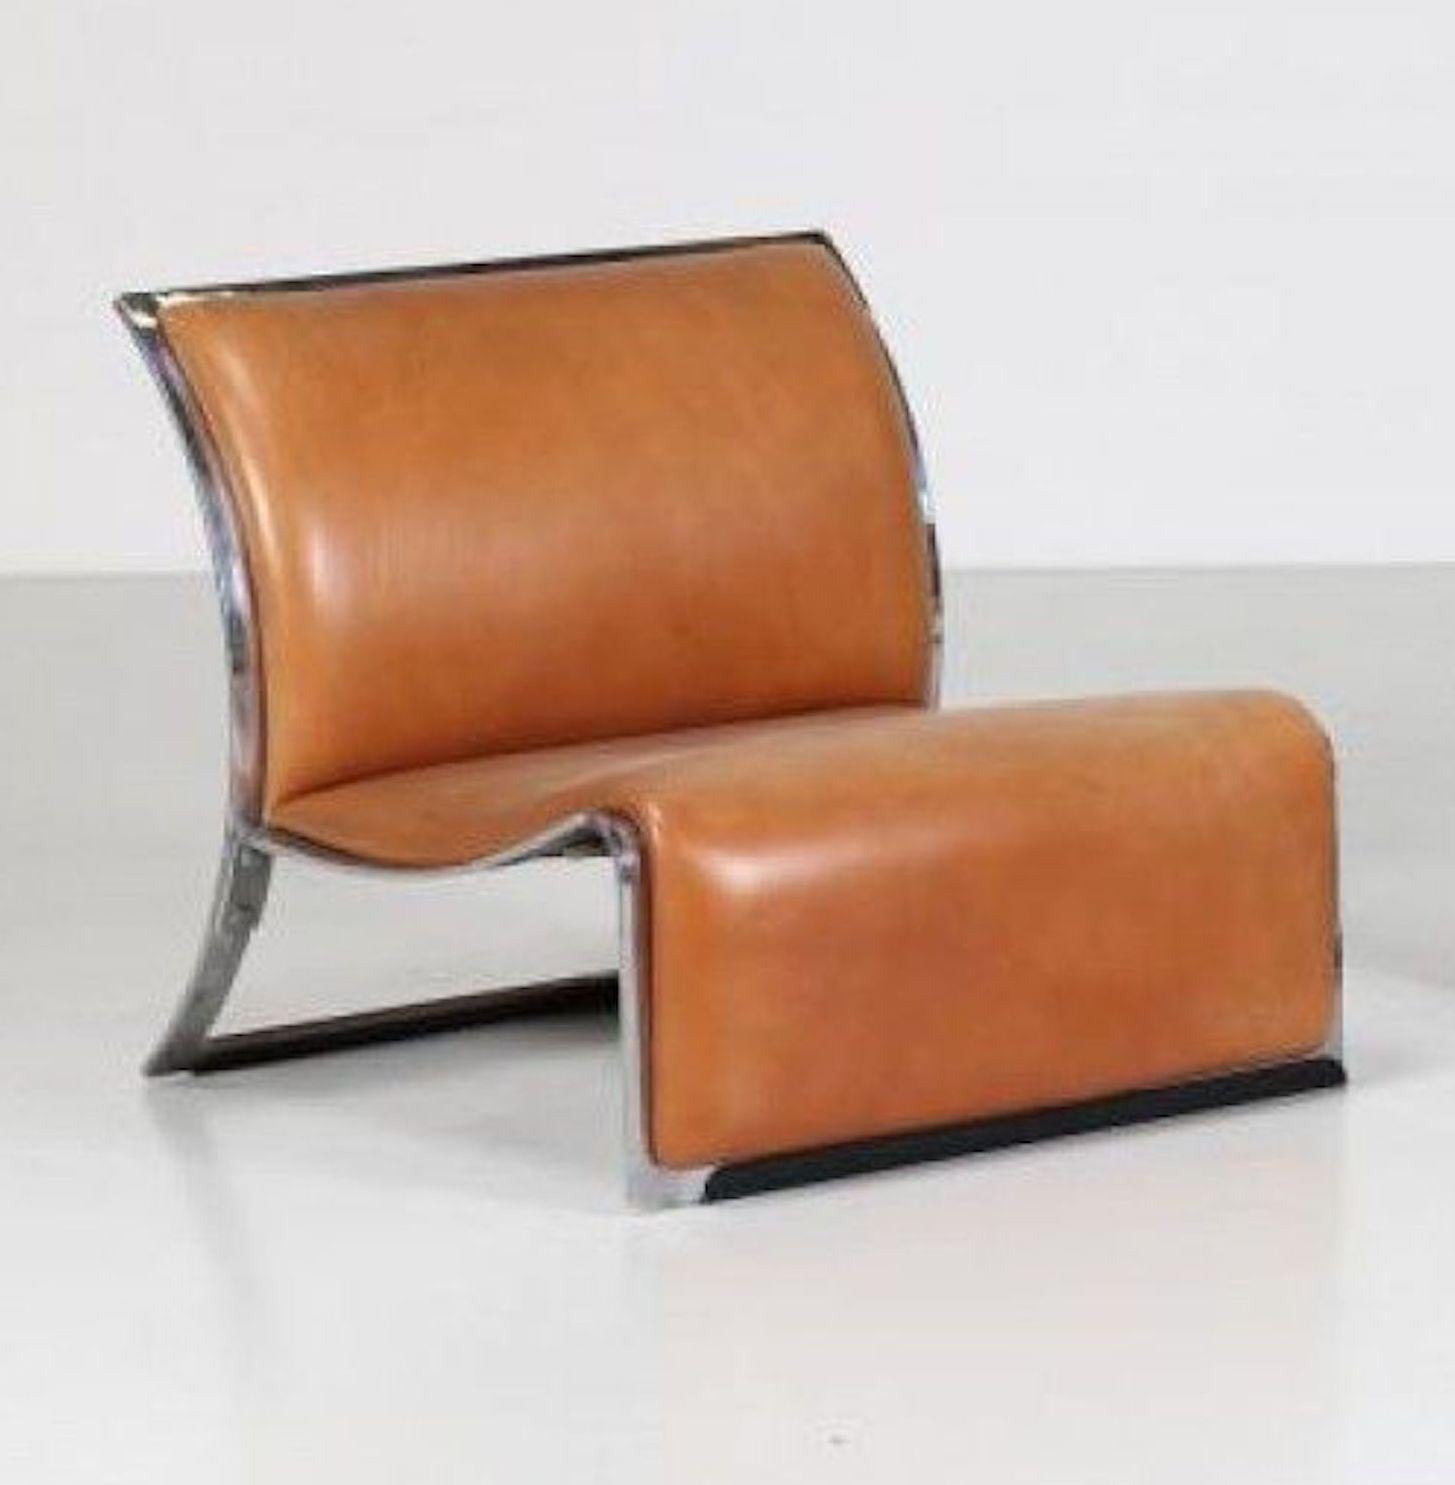 Pair of Vintage Italian armchairs in chromed metal and leather designed by Vittorio Introini in the 1960s for Saporti Italia 1965.

Very Good conditions.